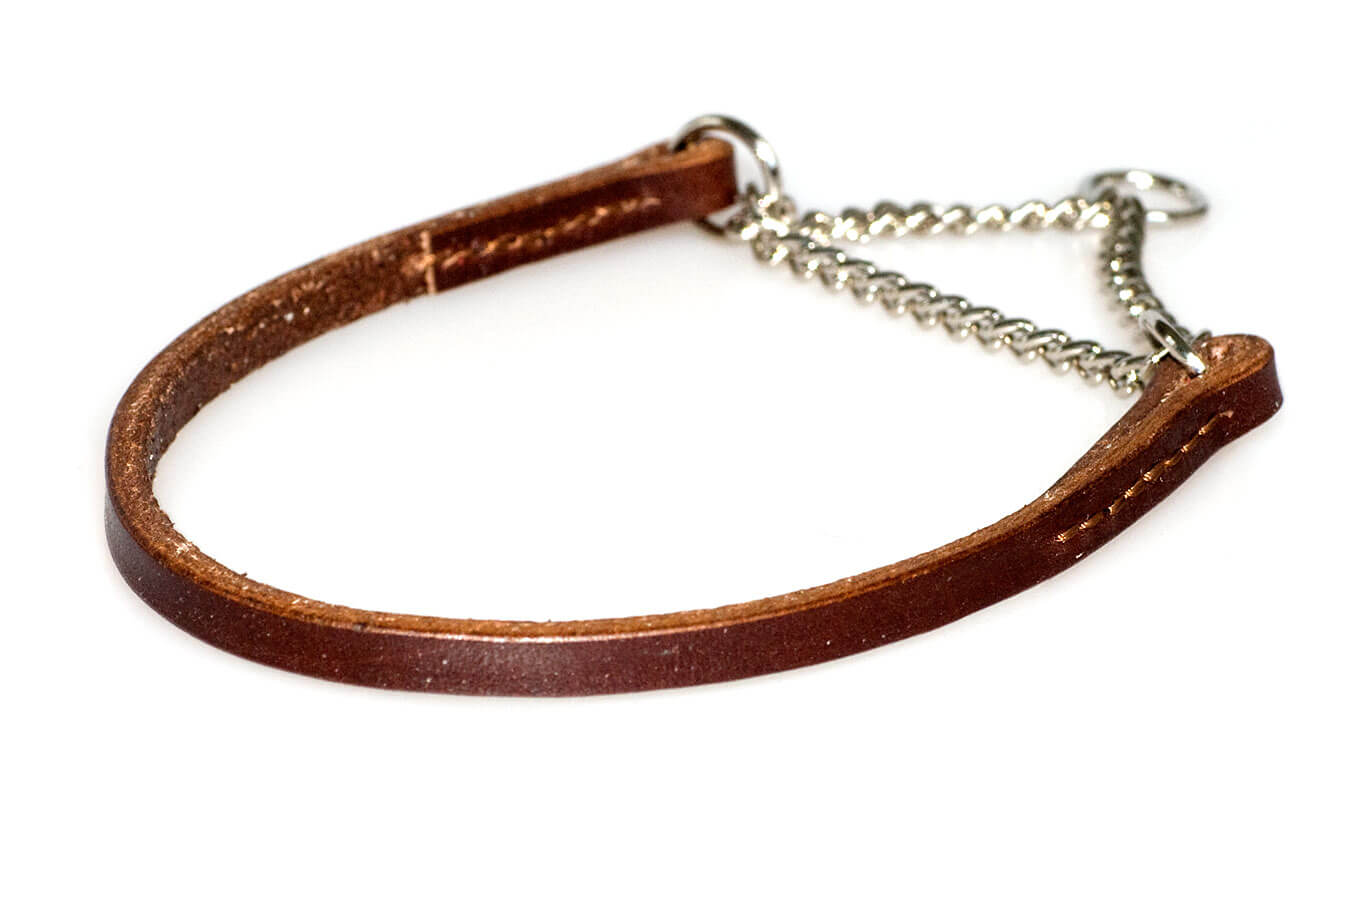 Brown leather martingale dog show collar